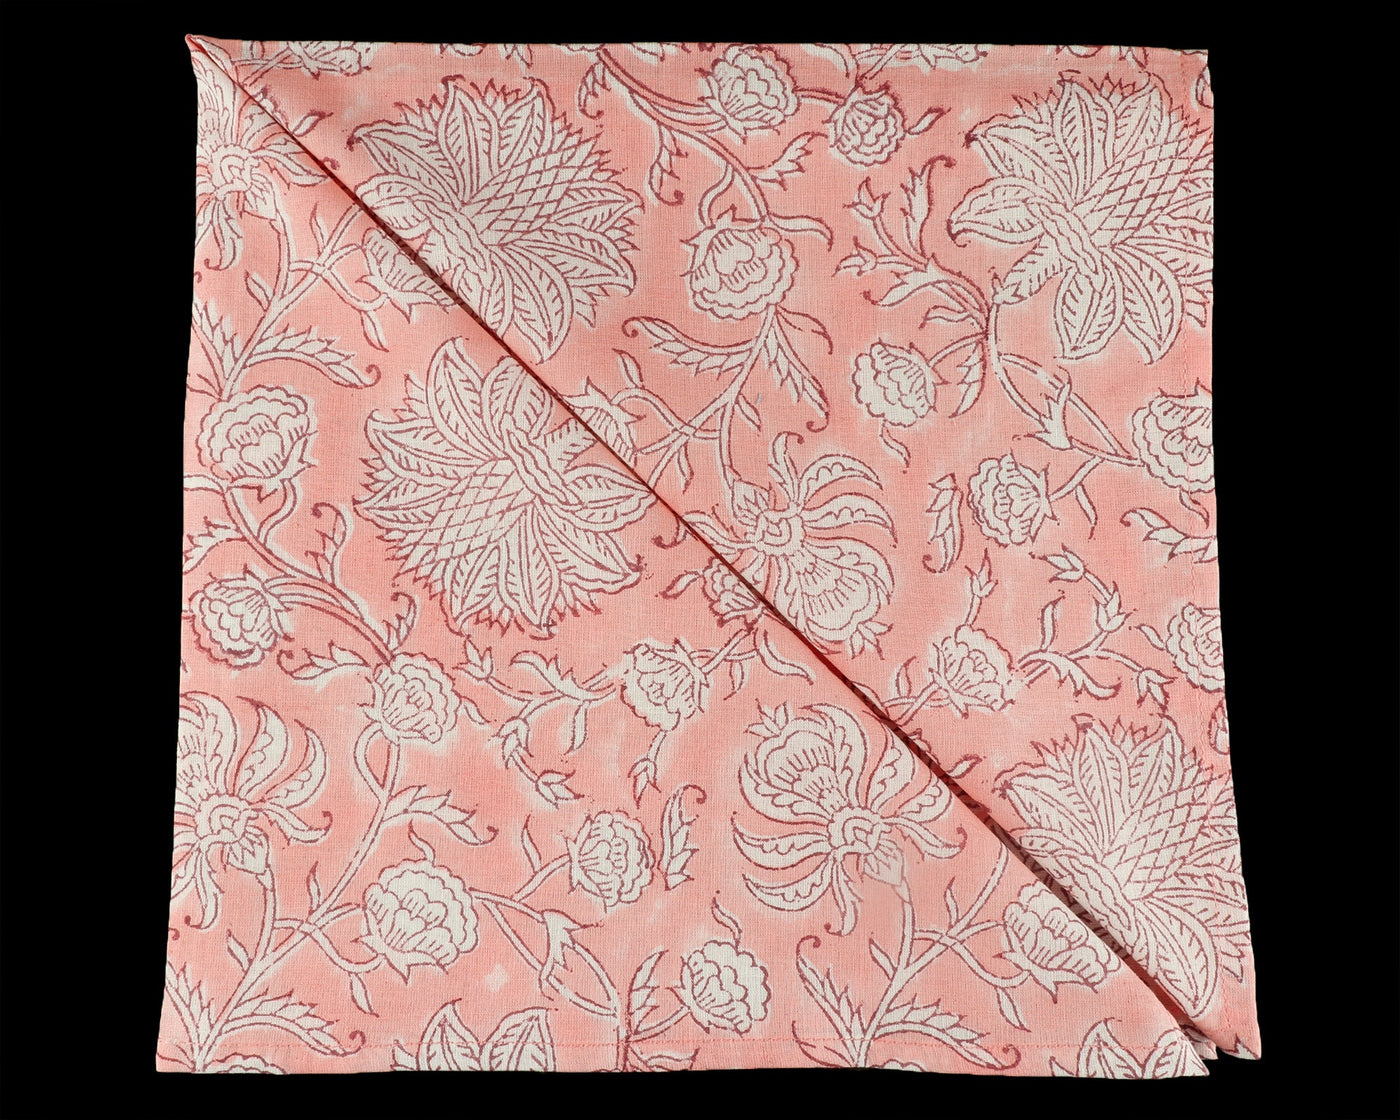 Salmon Pink and White Indian Floral Hand Block Printed 100% Pure Cotton Cloth Napkins, 18x18"- Cocktail Napkin, 20x20"- Dinner Napkins